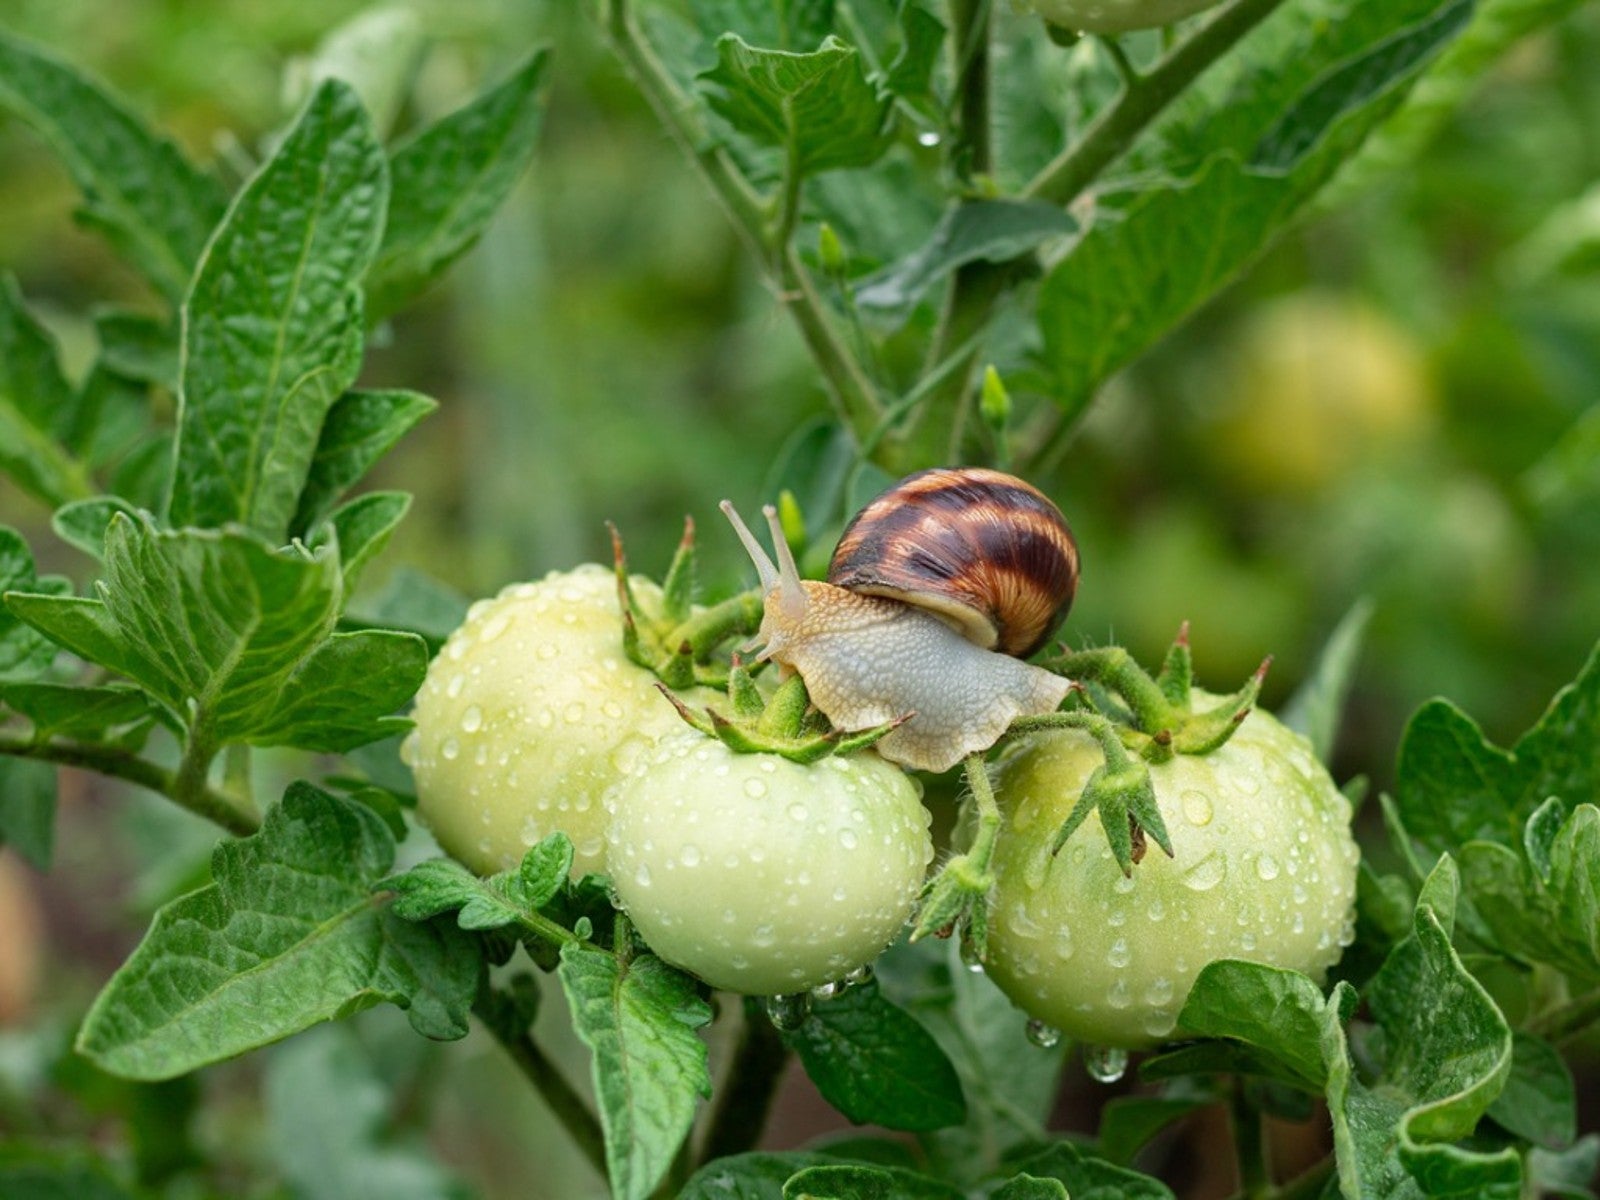 Arthropods and nematodes pests: (a) stripes on fruits caused by